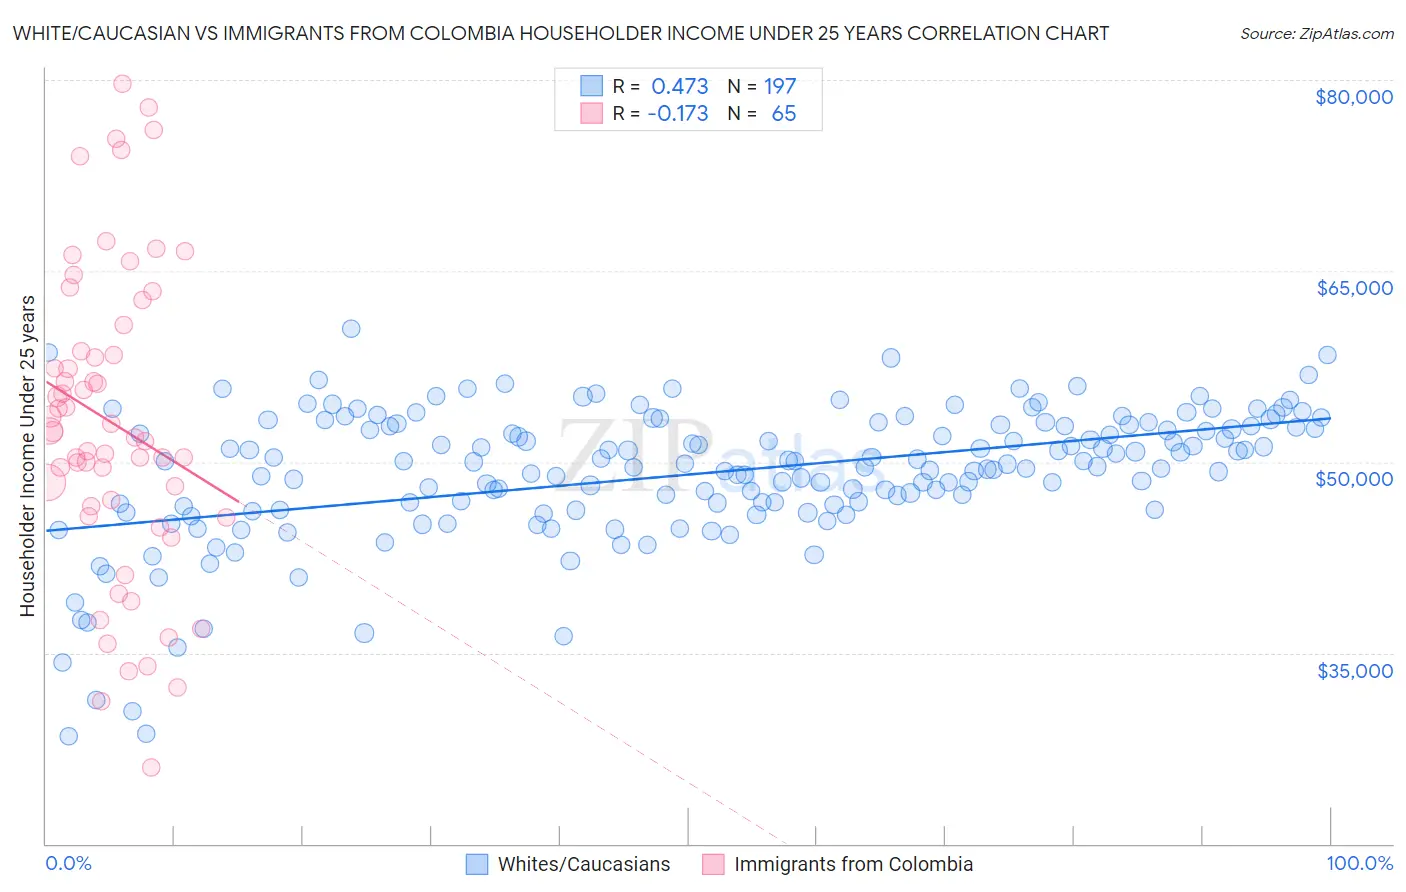 White/Caucasian vs Immigrants from Colombia Householder Income Under 25 years